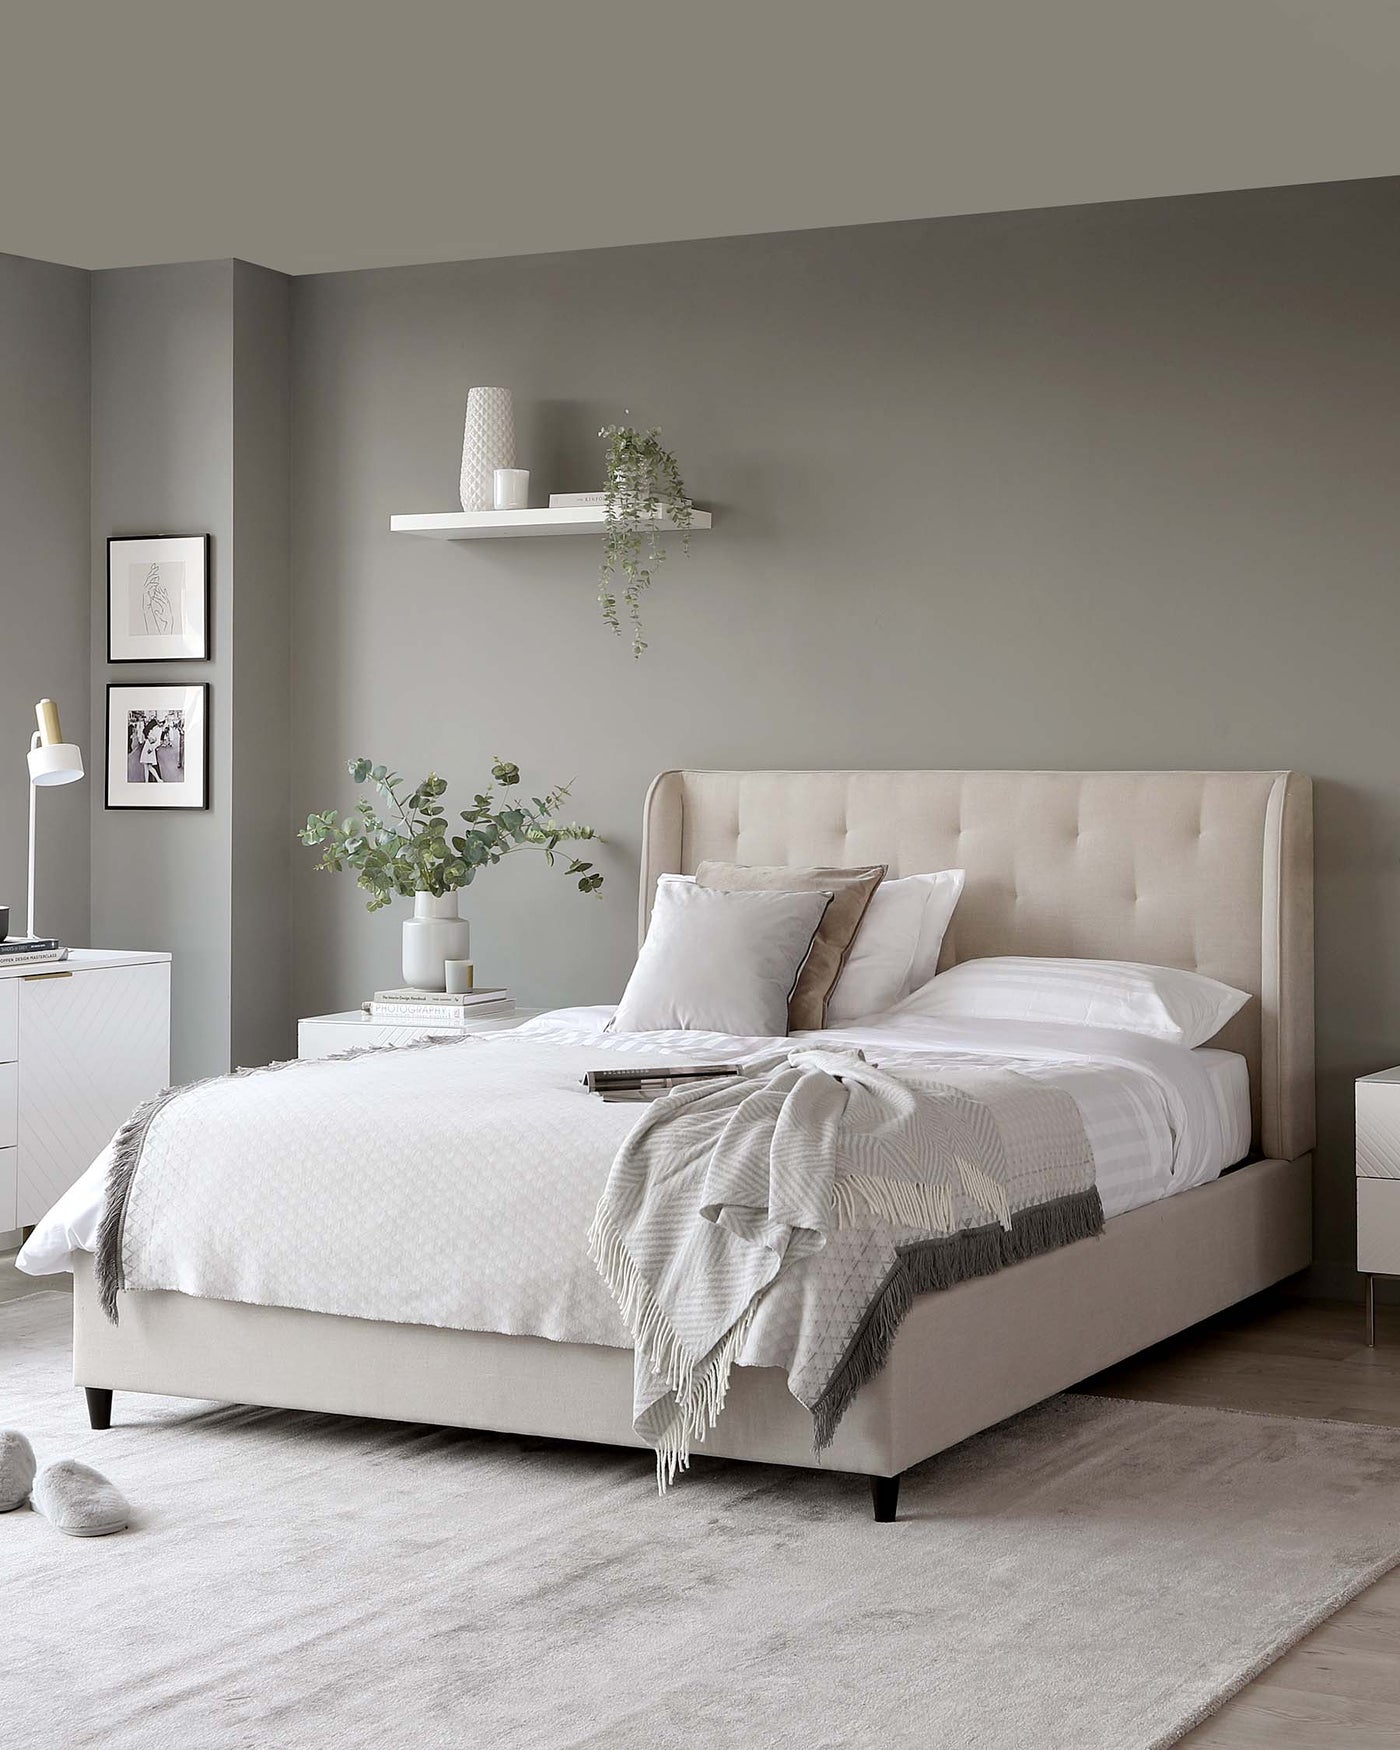 Elegant contemporary bedroom furniture featuring a beige upholstered bed with a high headboard and a white bedside table with minimalist design. Both pieces complement the neutral-toned decor.